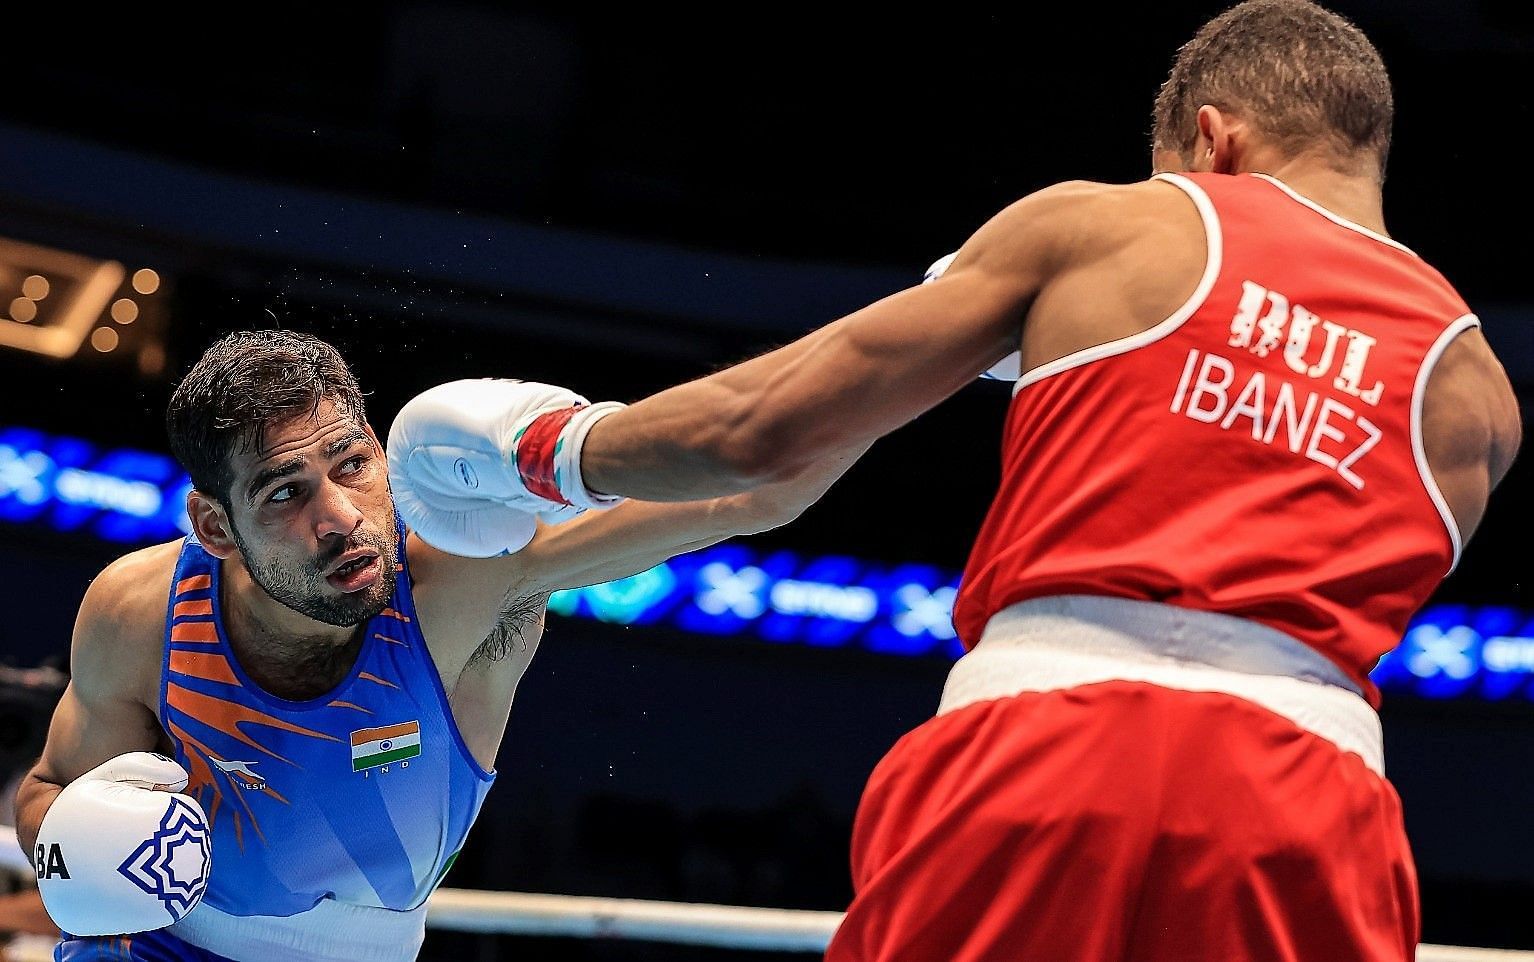 Mohammed Hussamuddin in action at the IBA Men World Boxing Championship in Tashkent on Wednesday. Photo credit: IBA